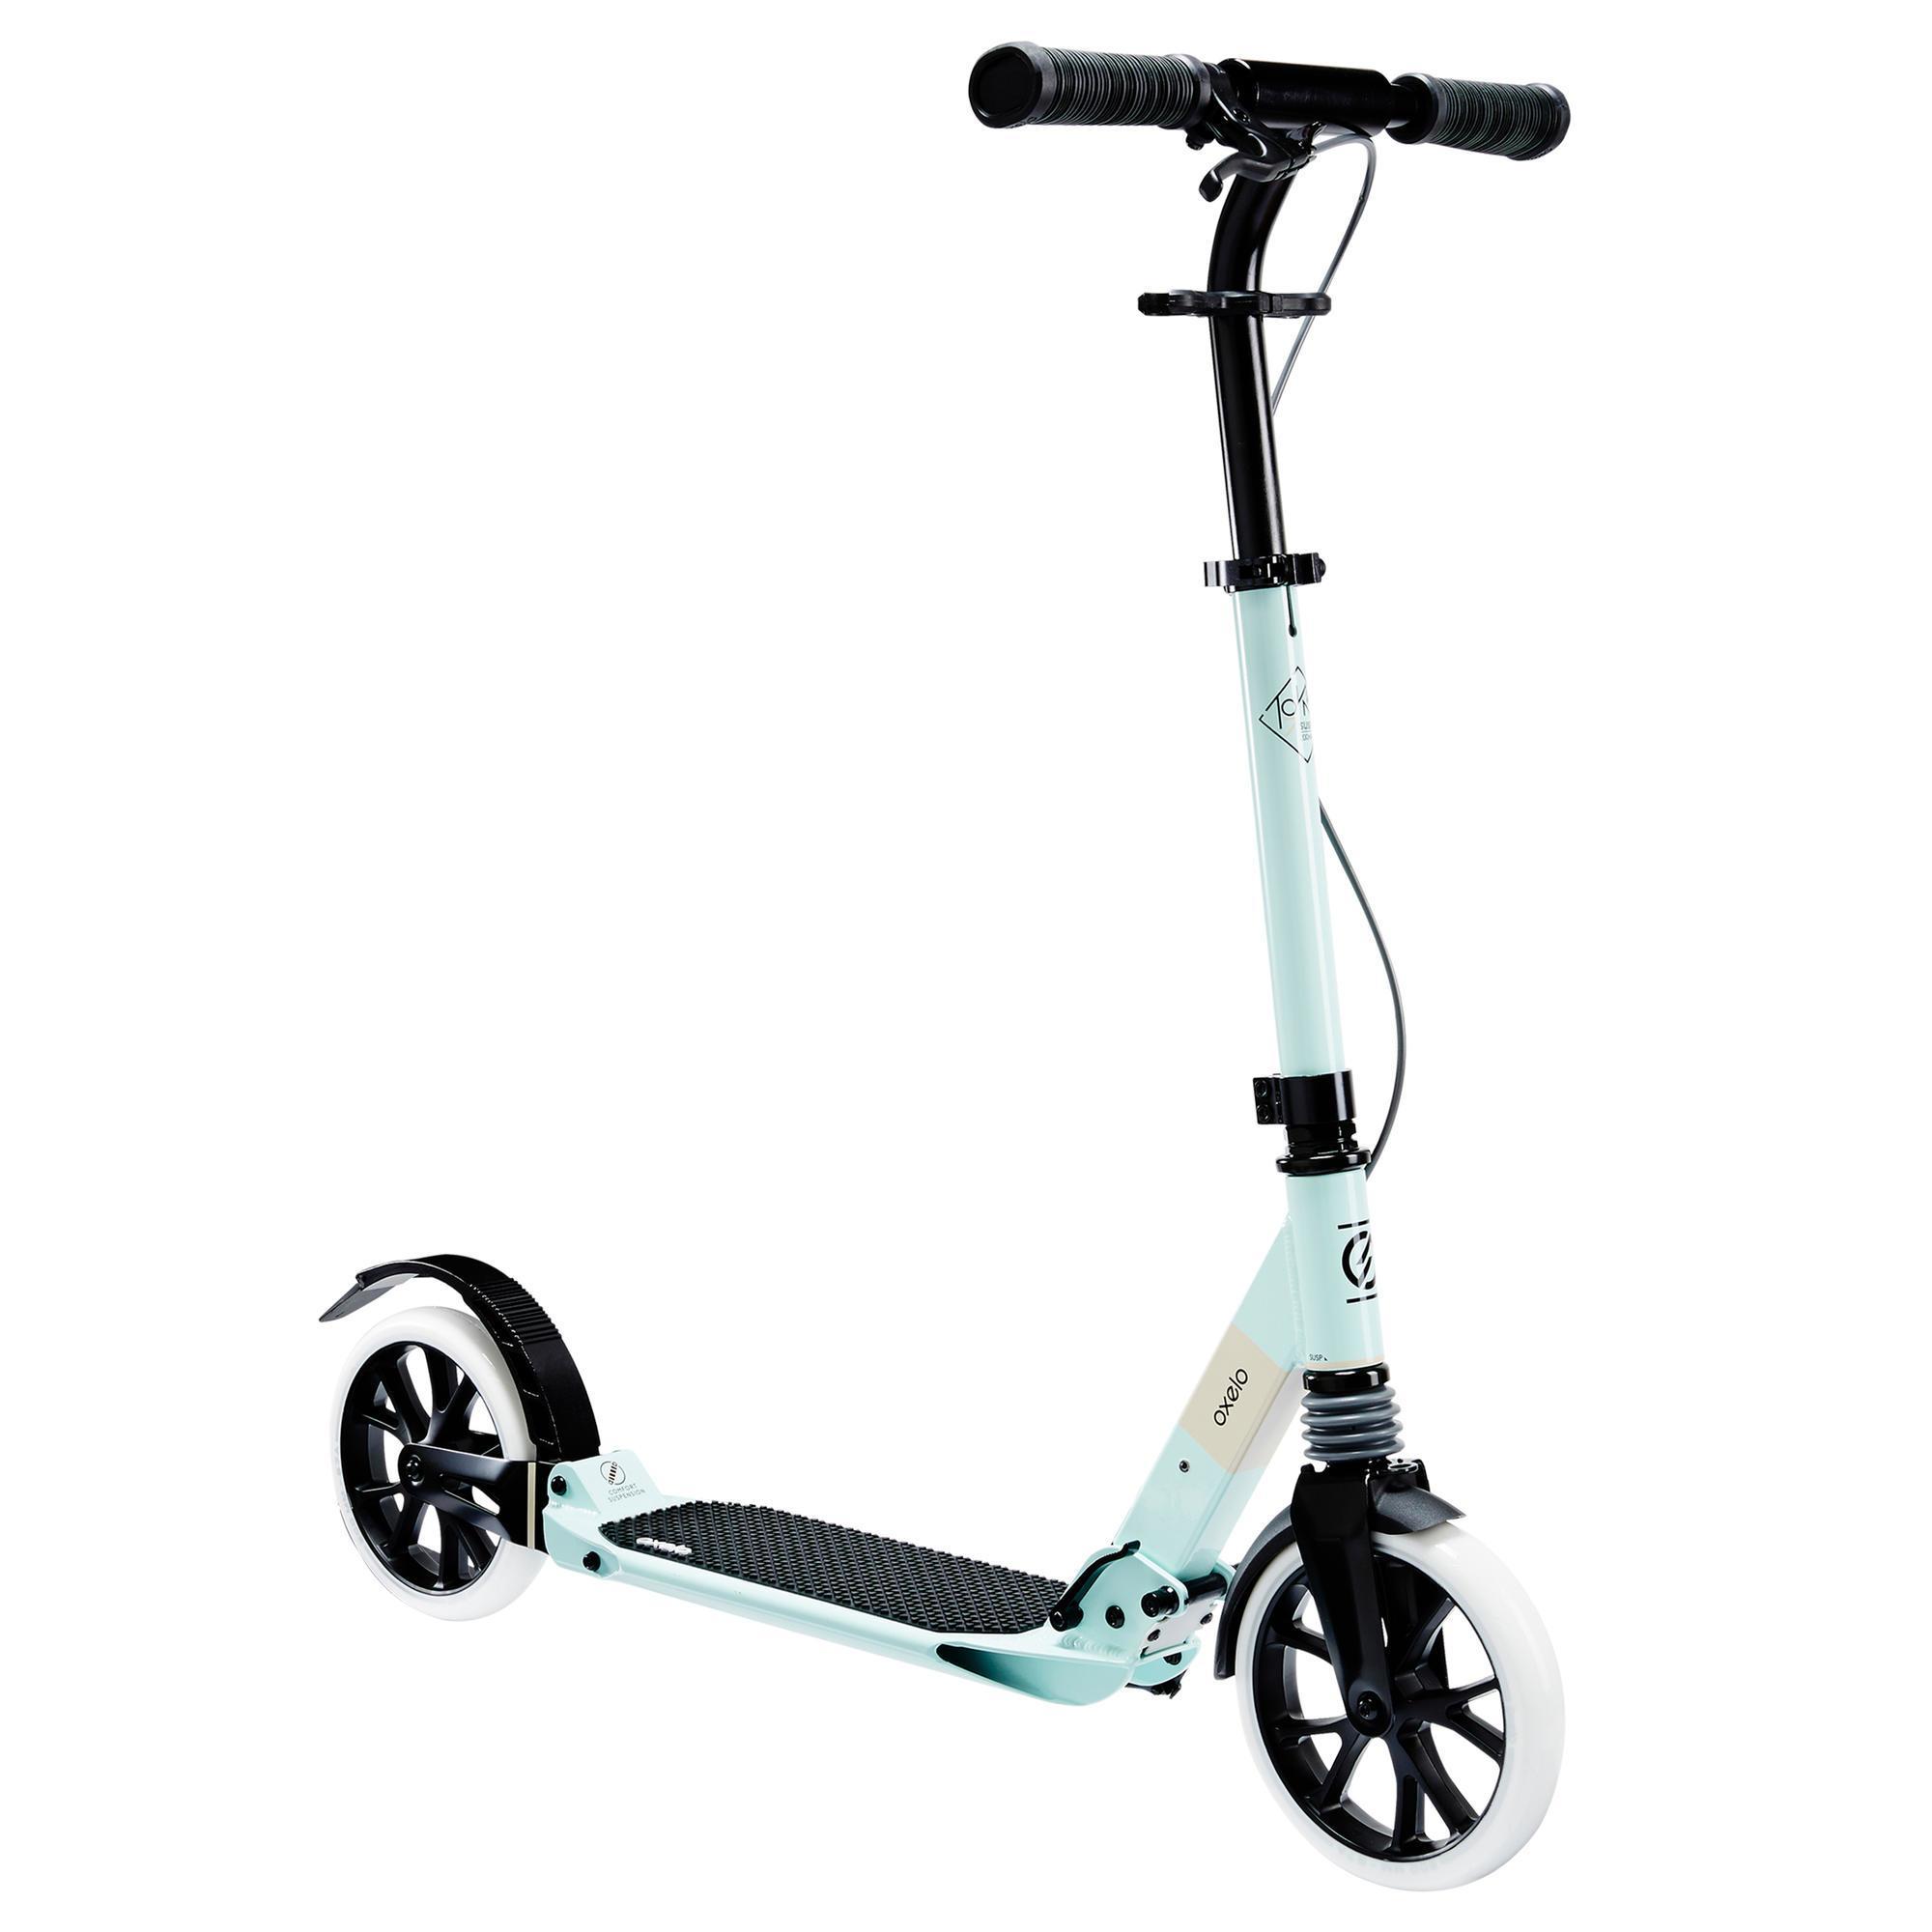 Town 7XL Adult Scooter - Decathlon